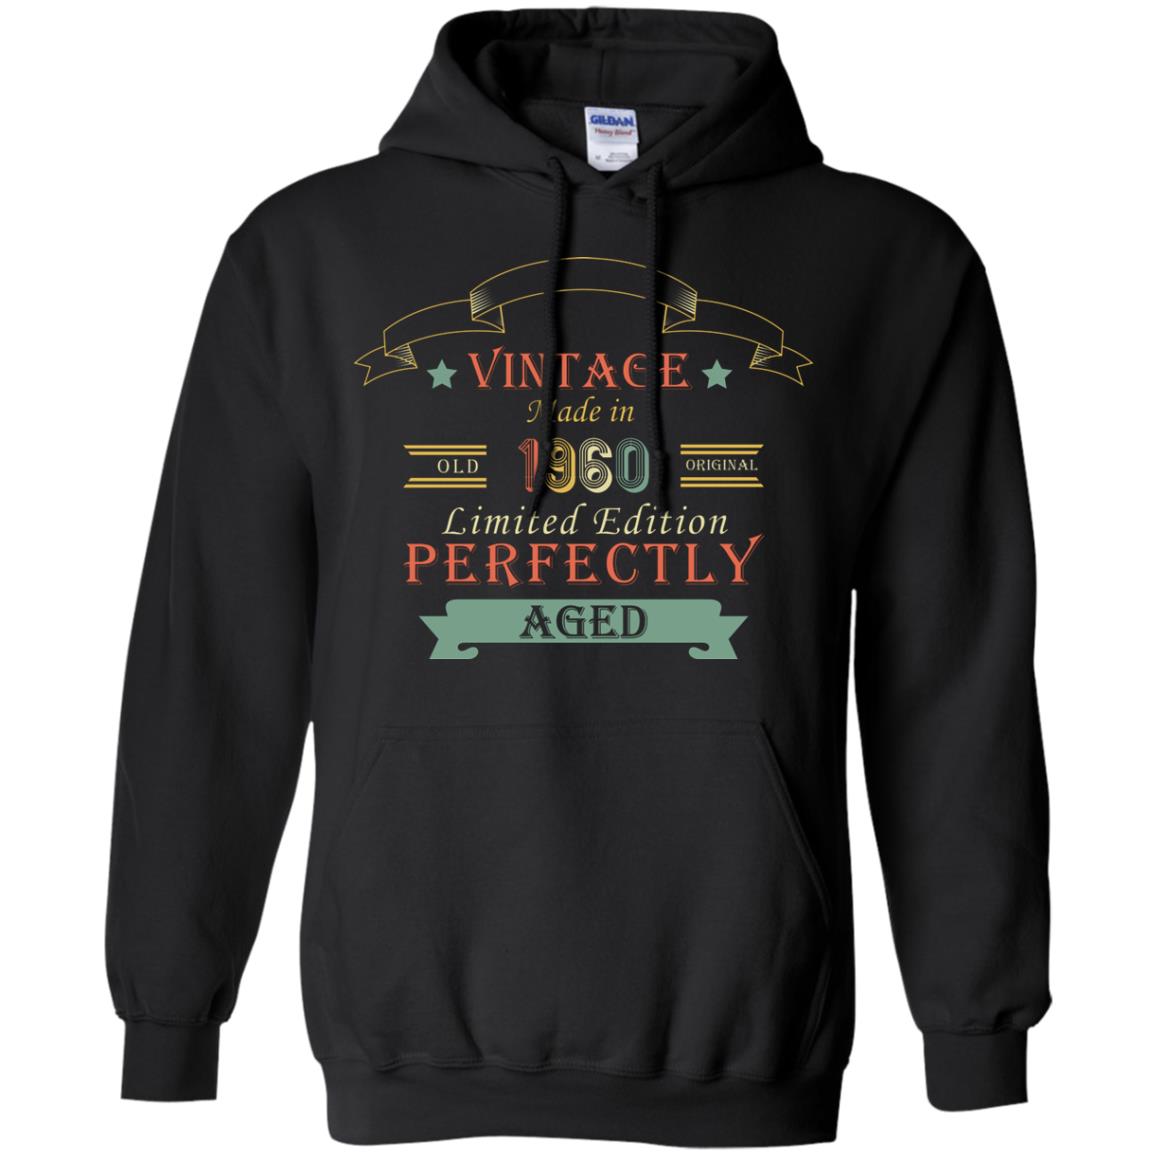 Vintage Made In Old 1960 Original Limited Edition Perfectly Aged 58th Birthday T-shirtG185 Gildan Pullover Hoodie 8 oz.